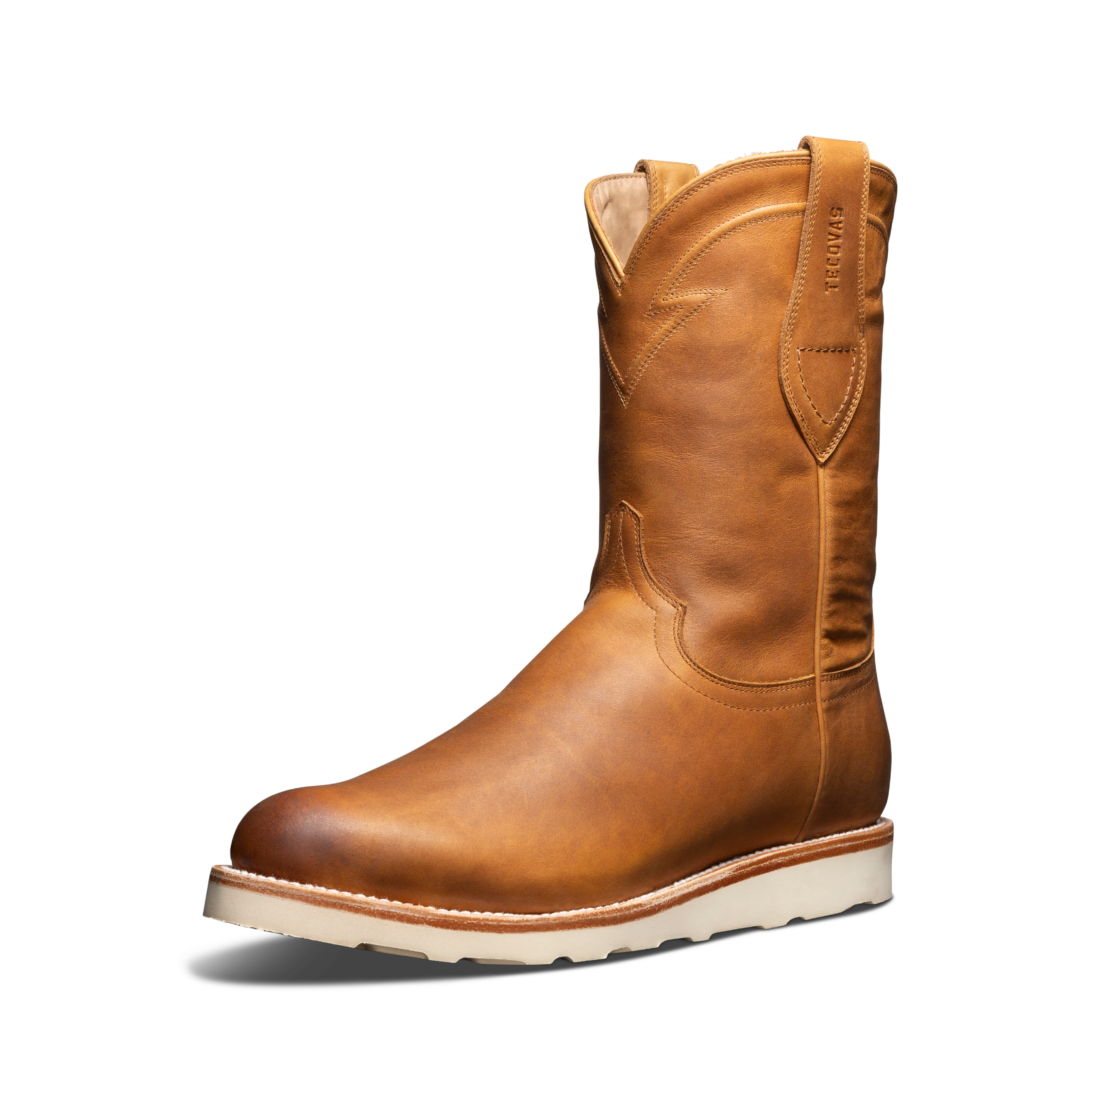 A brown boot